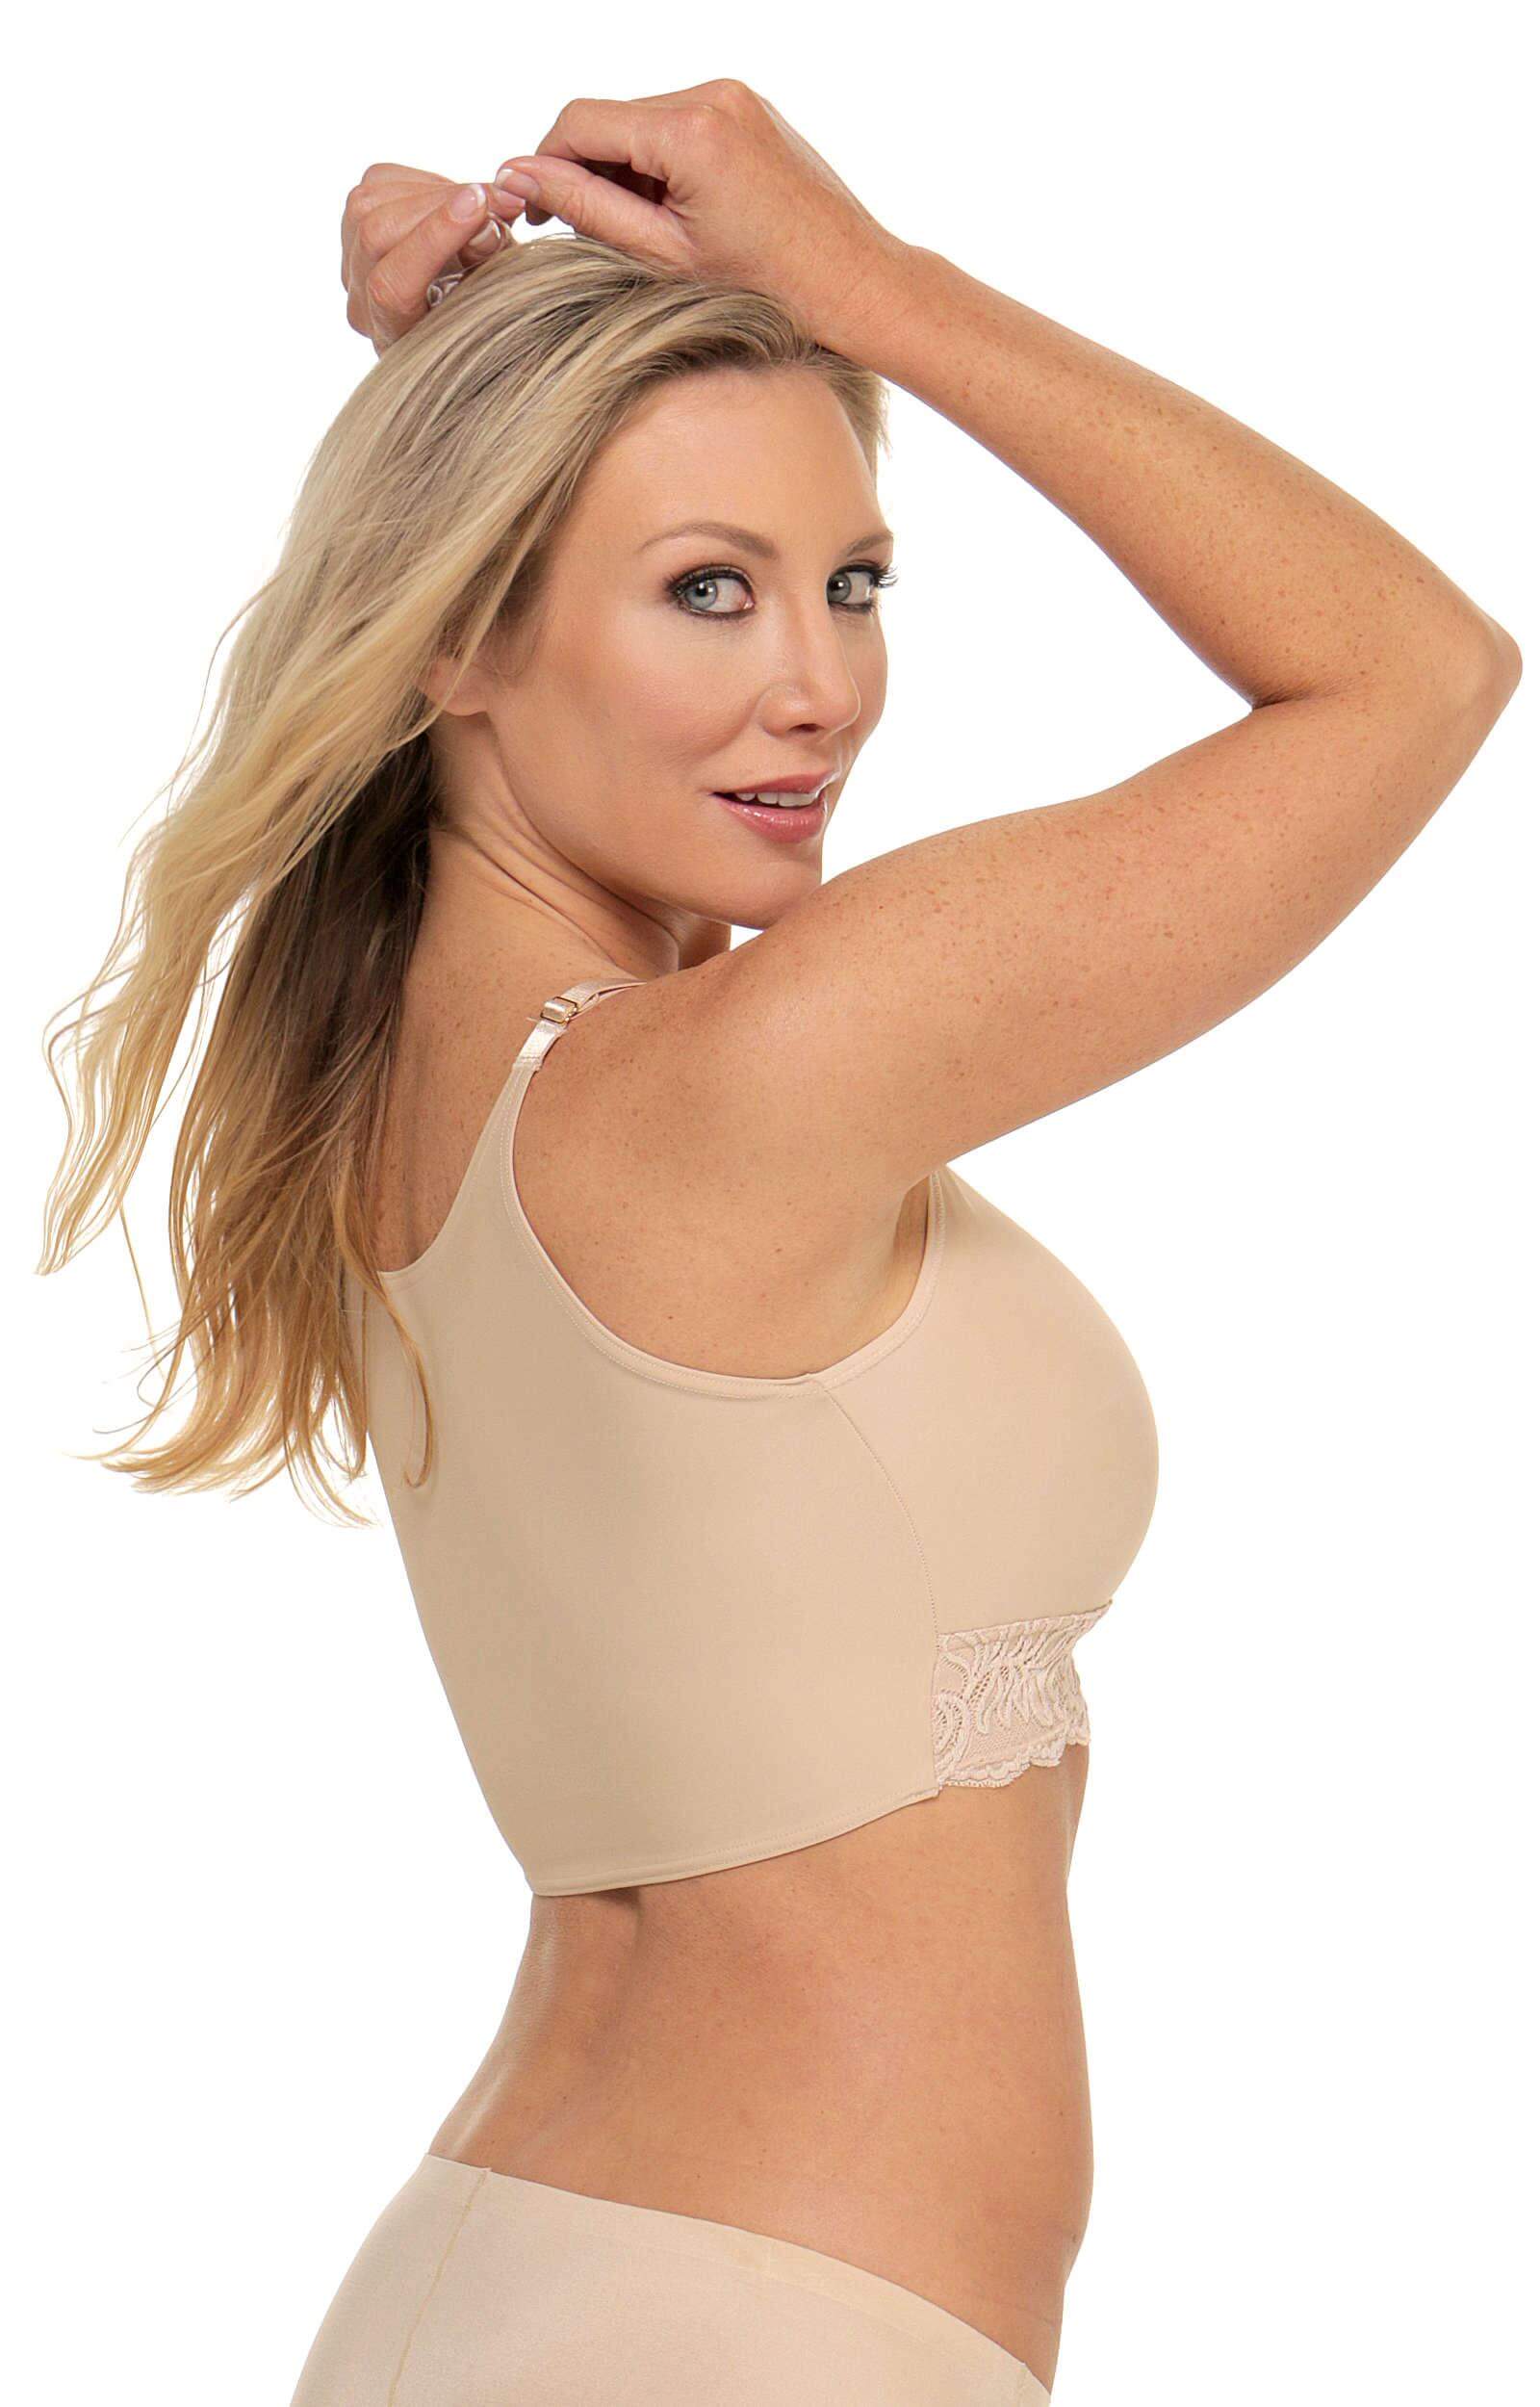 ActrovaX Stretchable Long Bra Top Women Cami Bra Lightly Padded